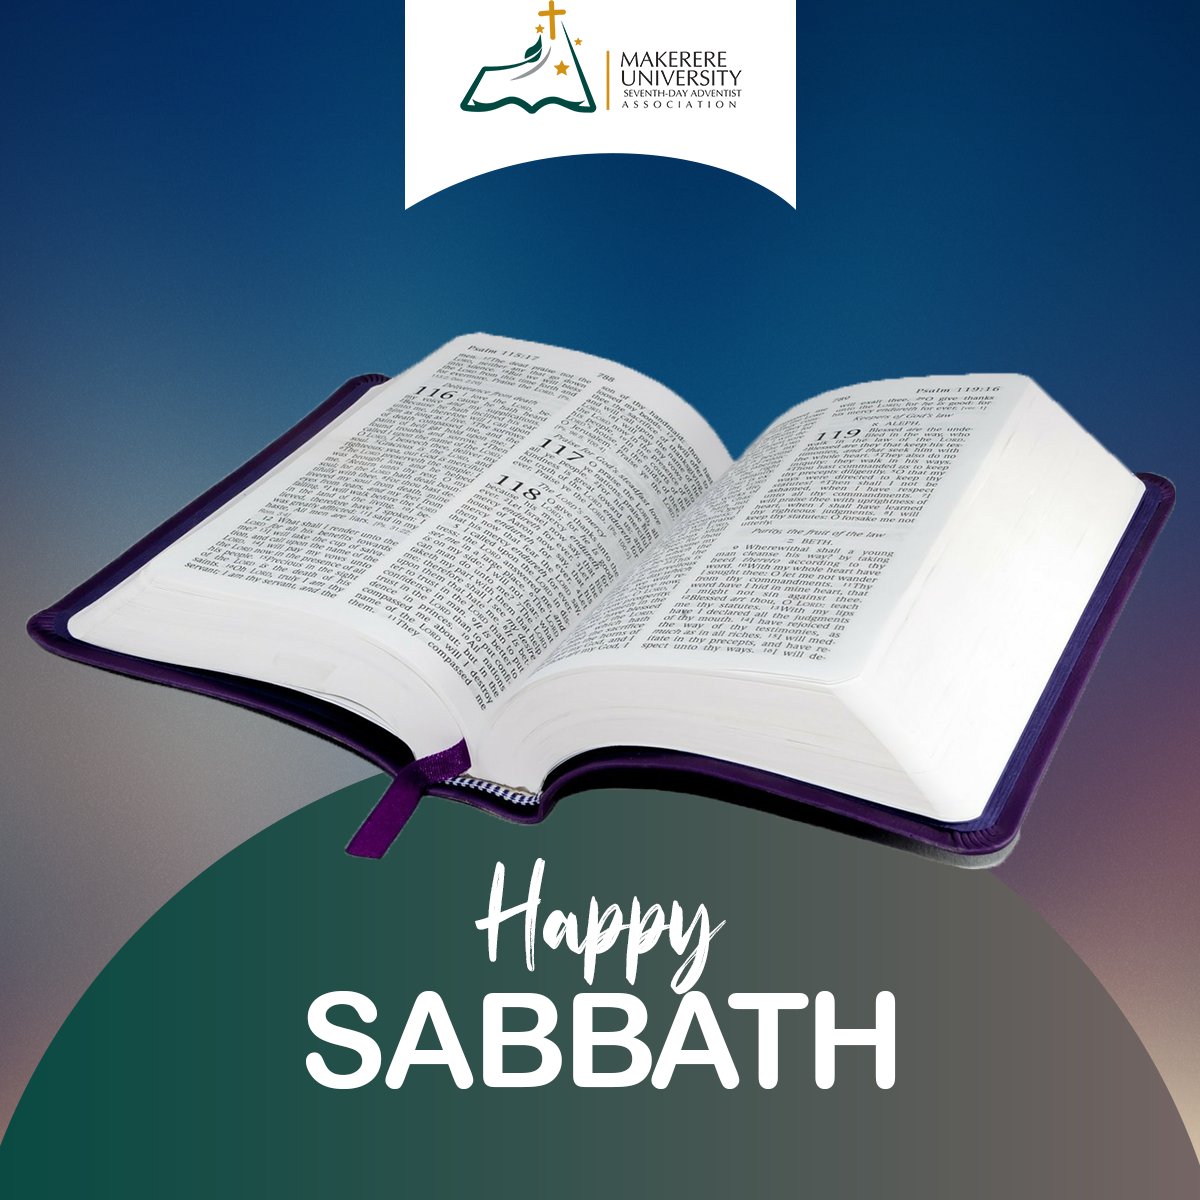 KJV Exodus 16:26
26 Six days ye shall gather it; but on the seventh day, which is the sabbath, in it there shall be none.
#HappySabbath
#DigitalEvangelism